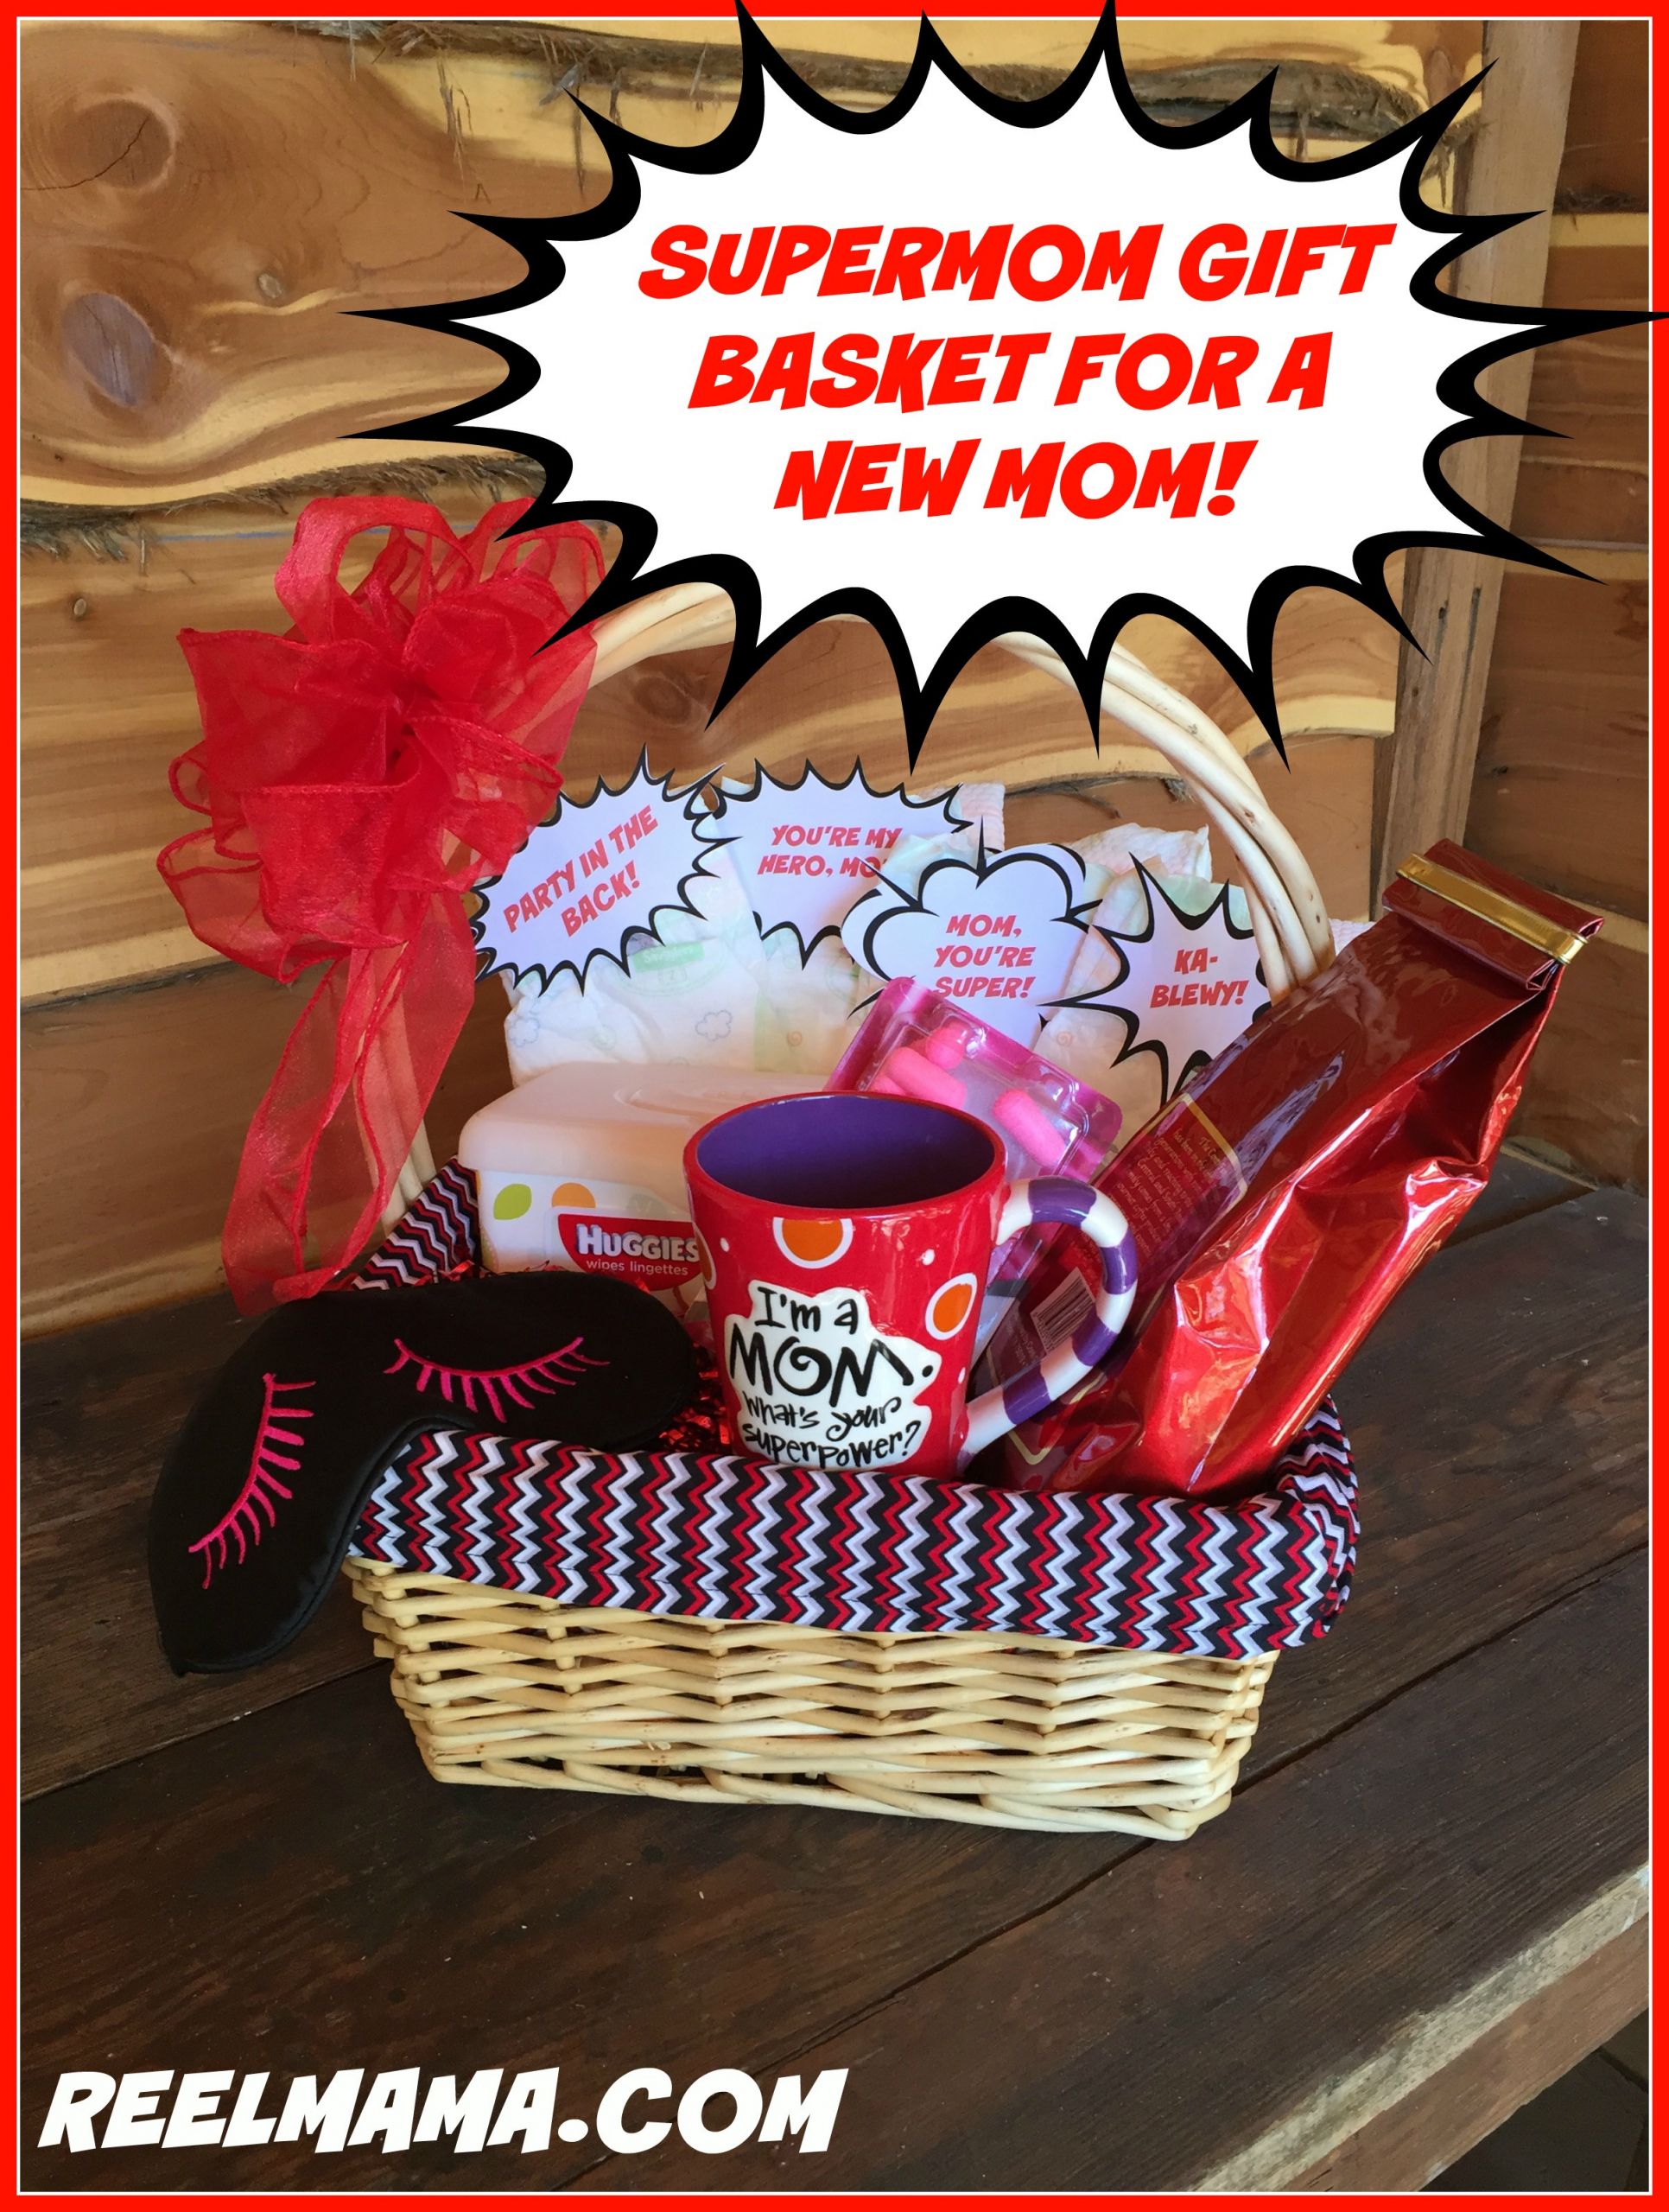 Birthday Gift Ideas For New Moms
 Supermom t basket for a new mom Reelmama